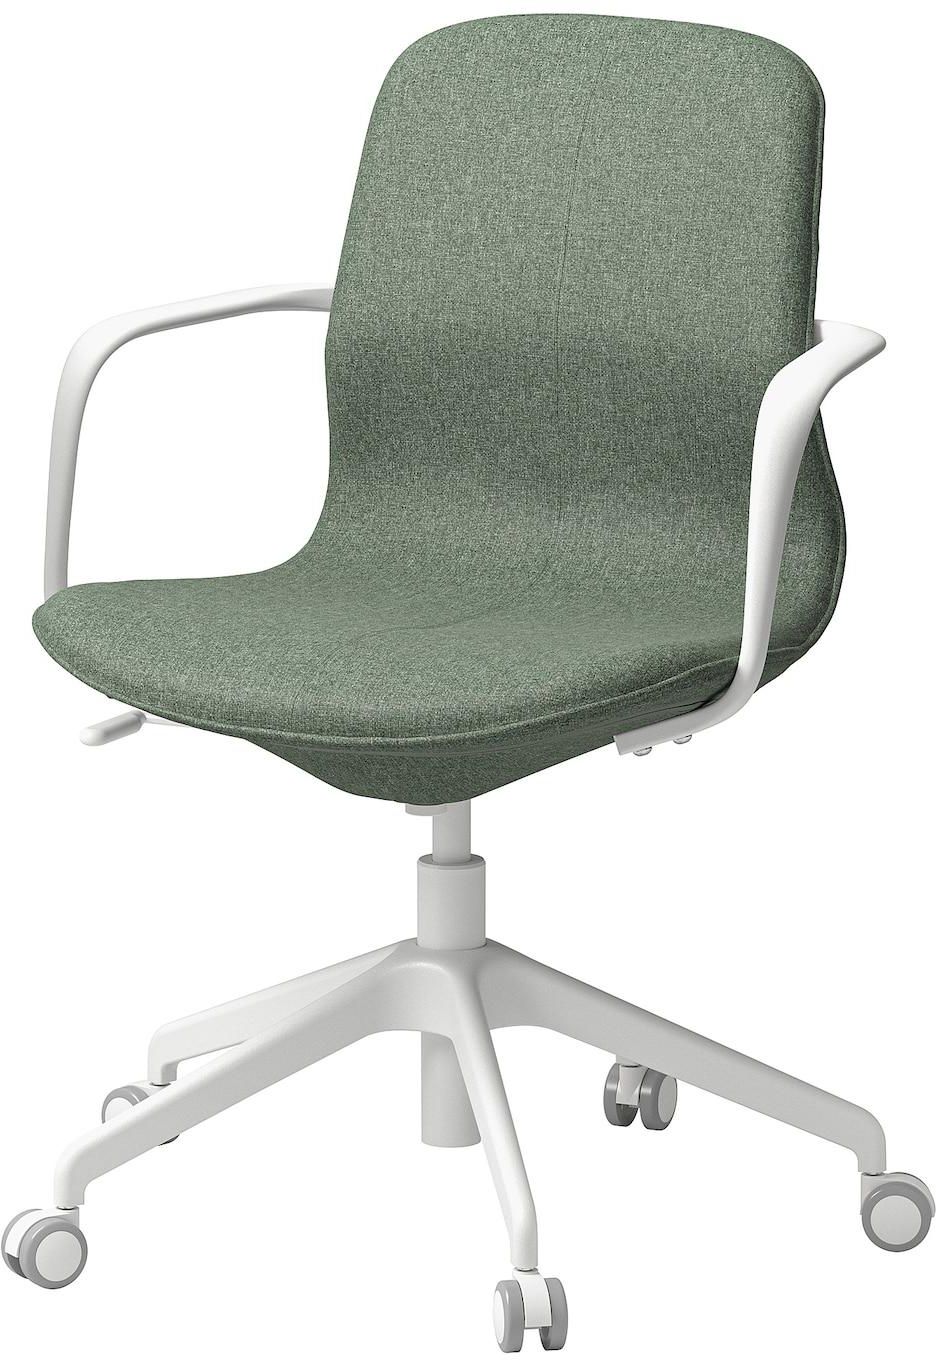 LÅNGFJÄLL Conference chair with armrests - Gunnared green-grey/white